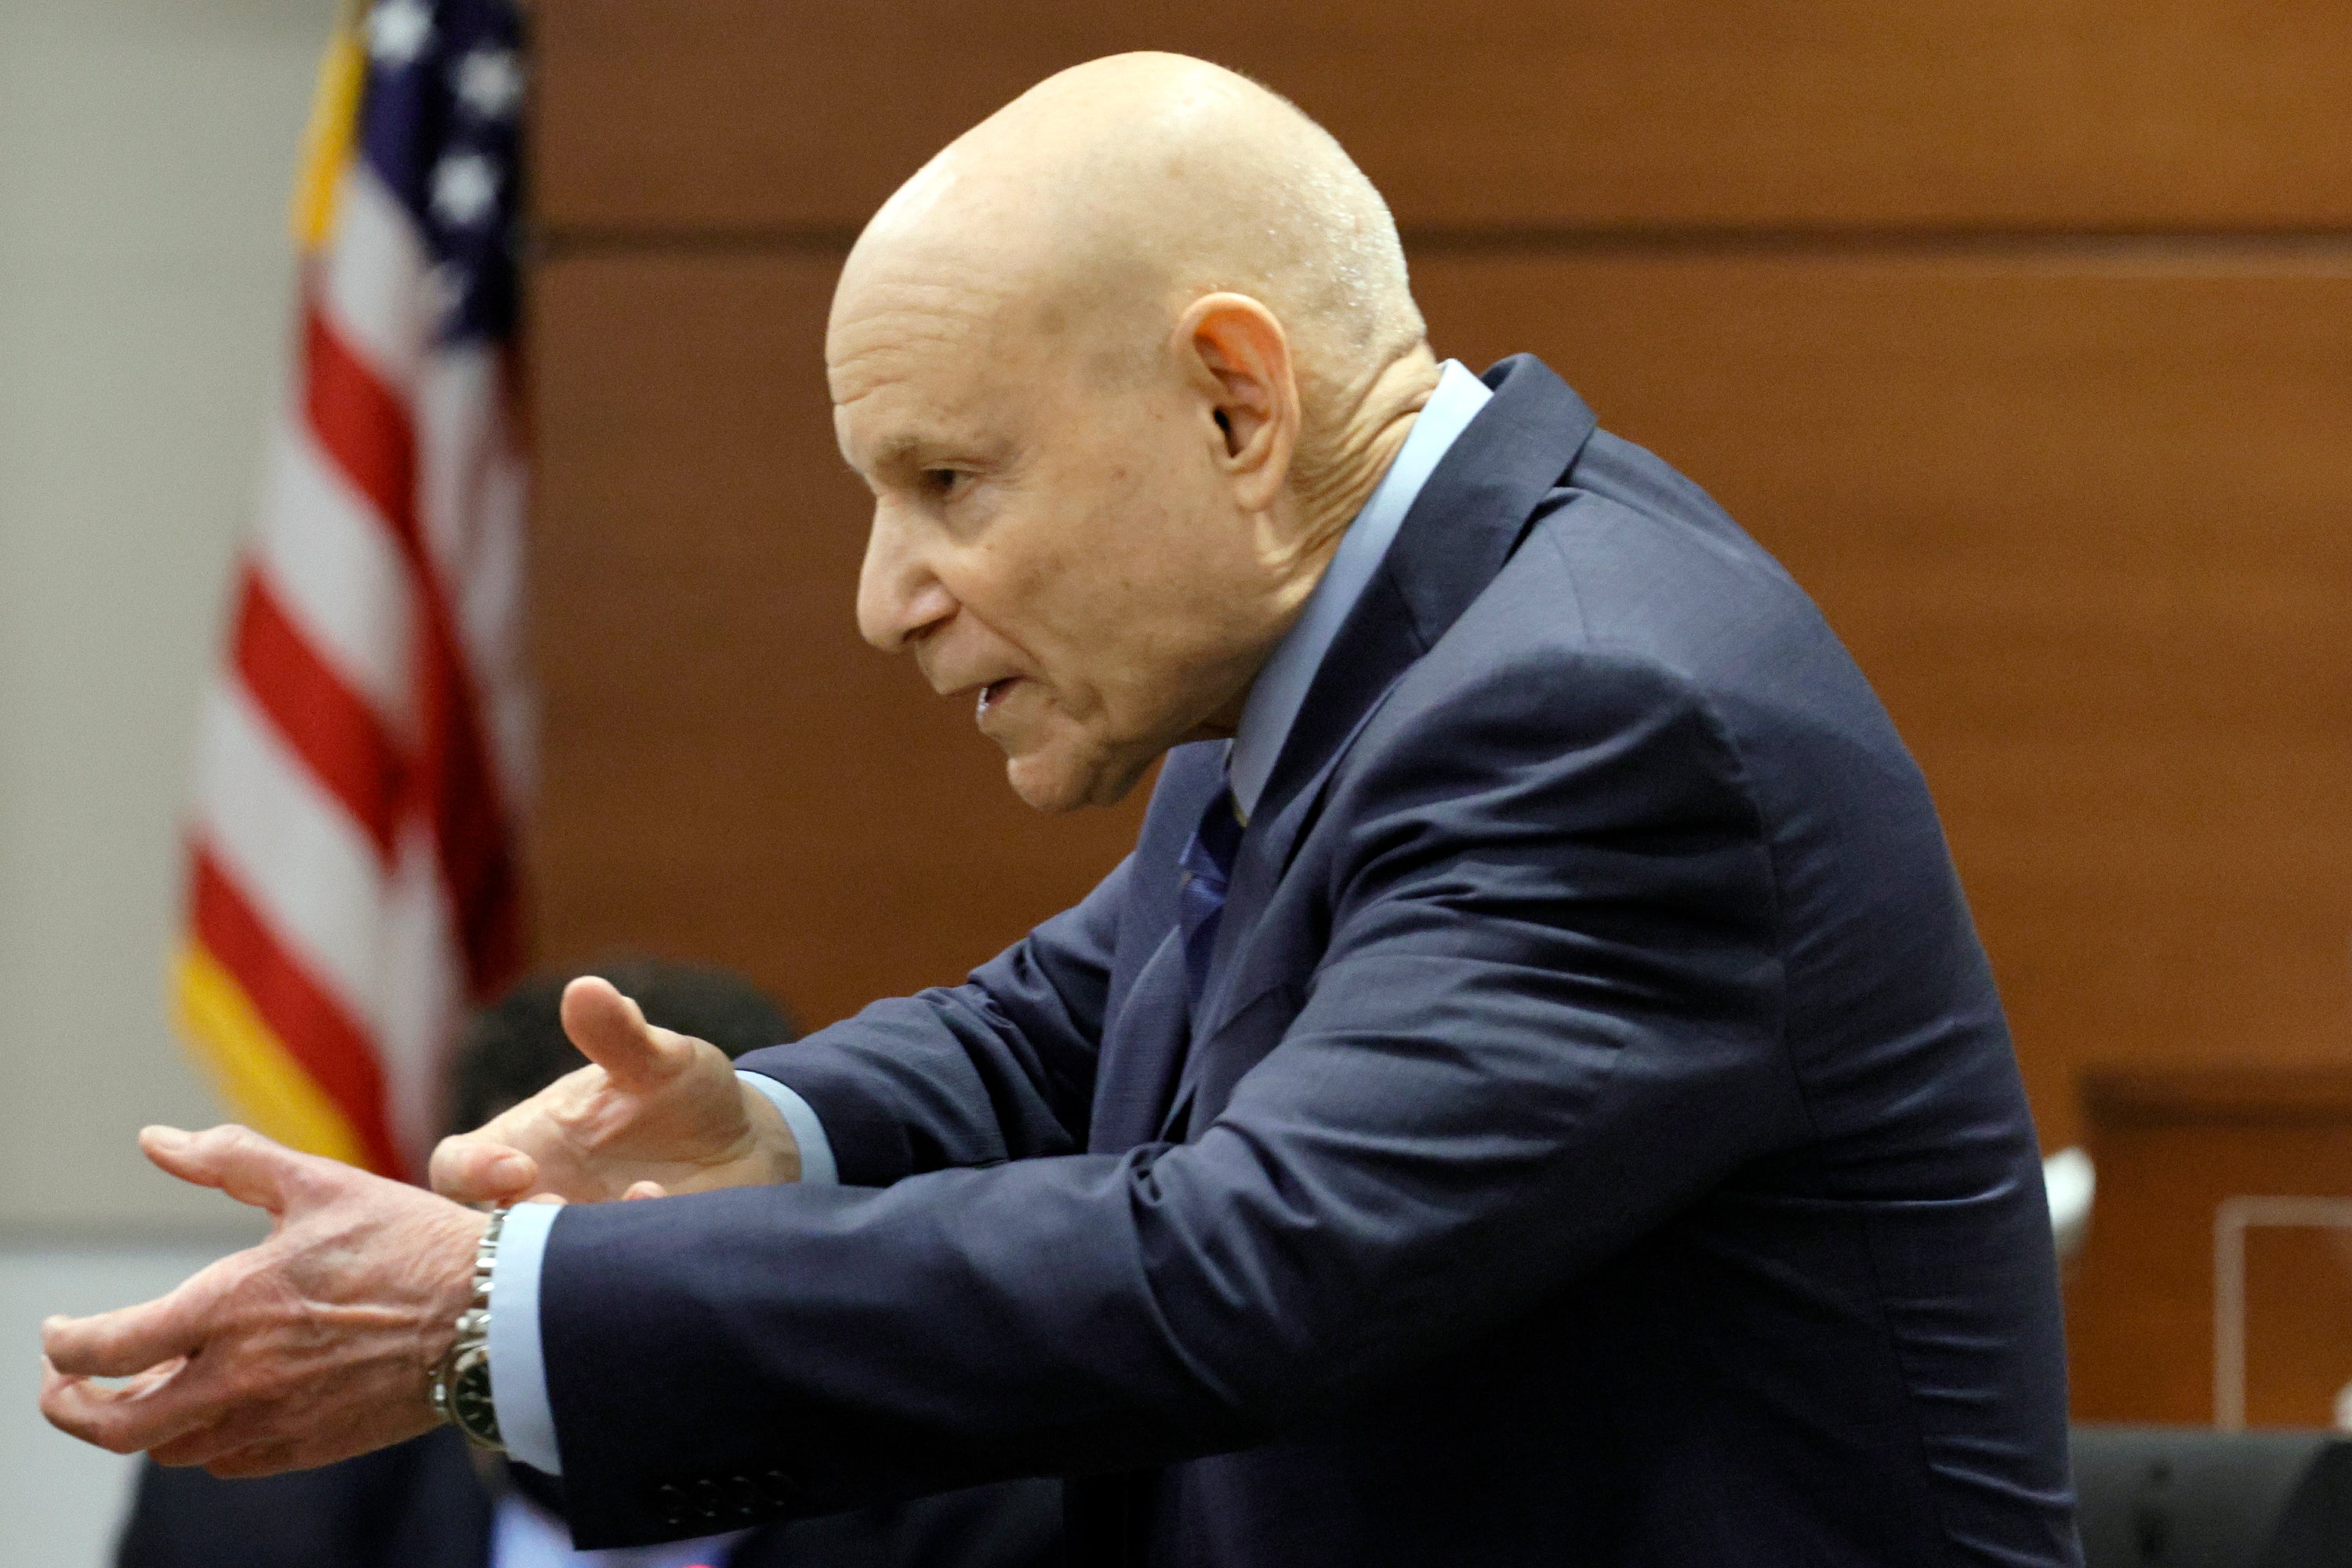 Prosecutor Mike Satz gestures as if he is holding a rifle during his closing argument